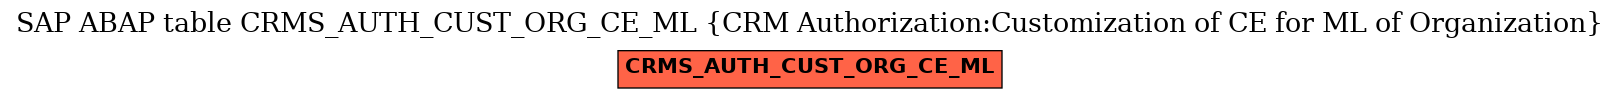 E-R Diagram for table CRMS_AUTH_CUST_ORG_CE_ML (CRM Authorization:Customization of CE for ML of Organization)